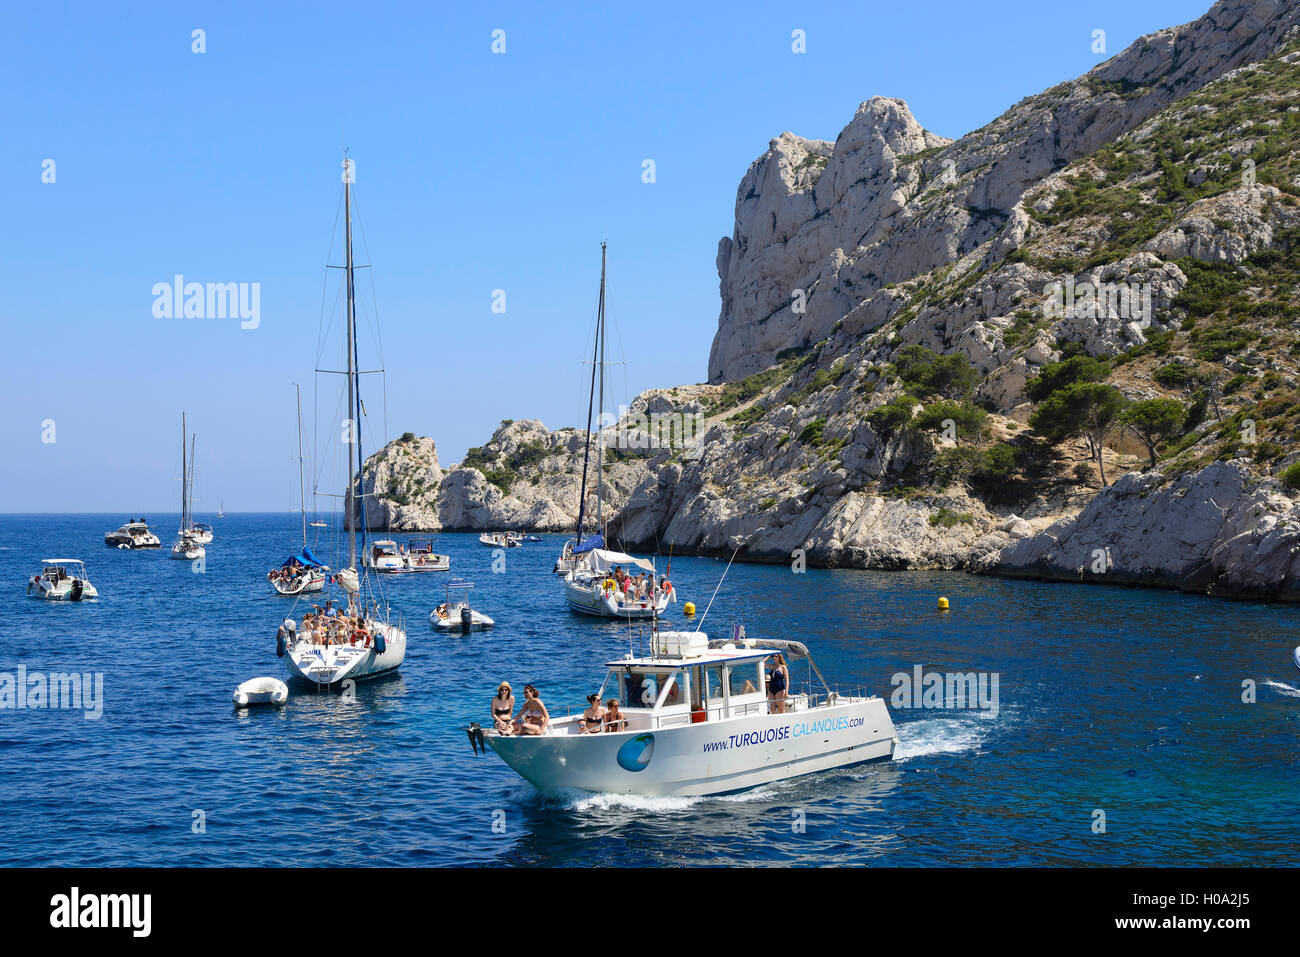 Excursion boats on the Mediterranean Sea, Calanques National Park, Marseille, Provence, Cote d'Azur, France Stock Photo